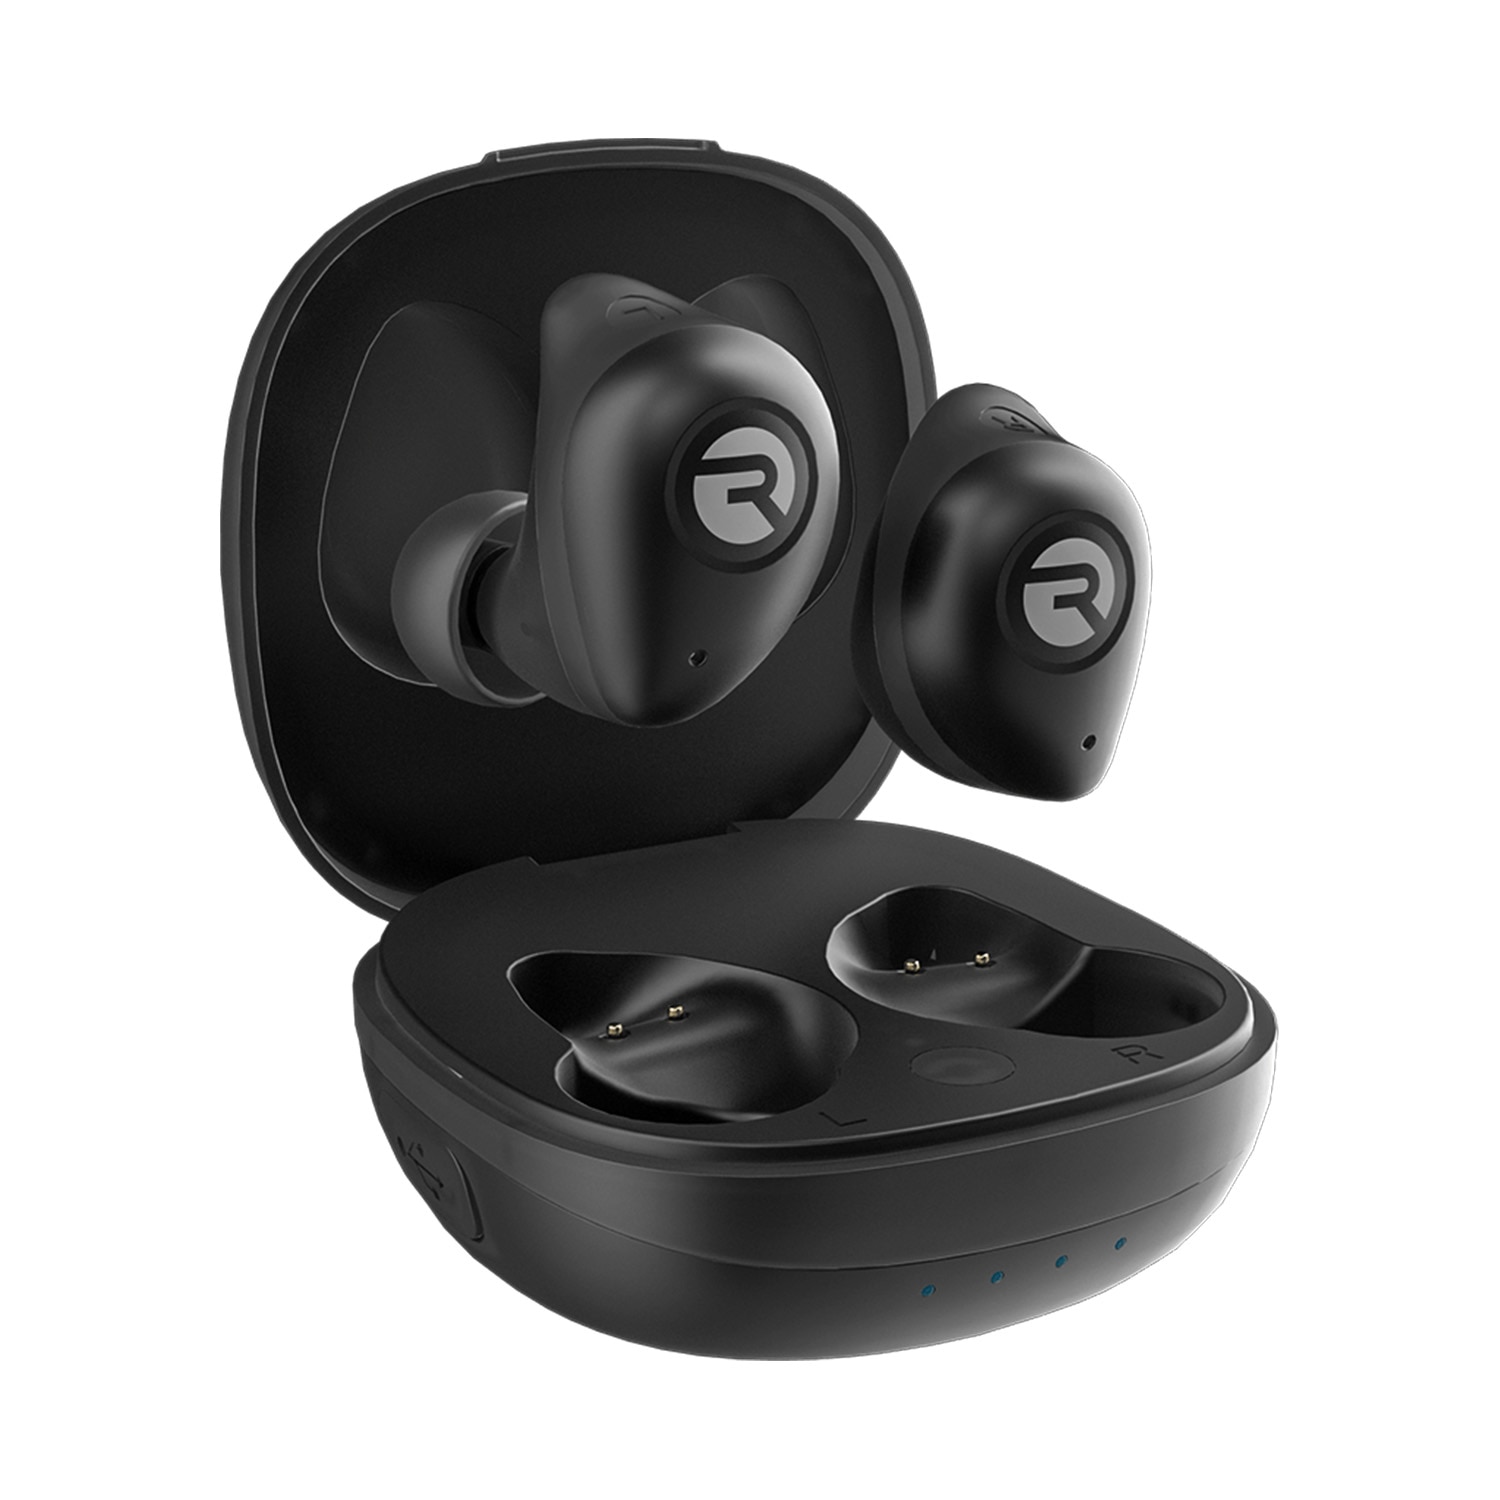 The Fitness Earbuds- Black